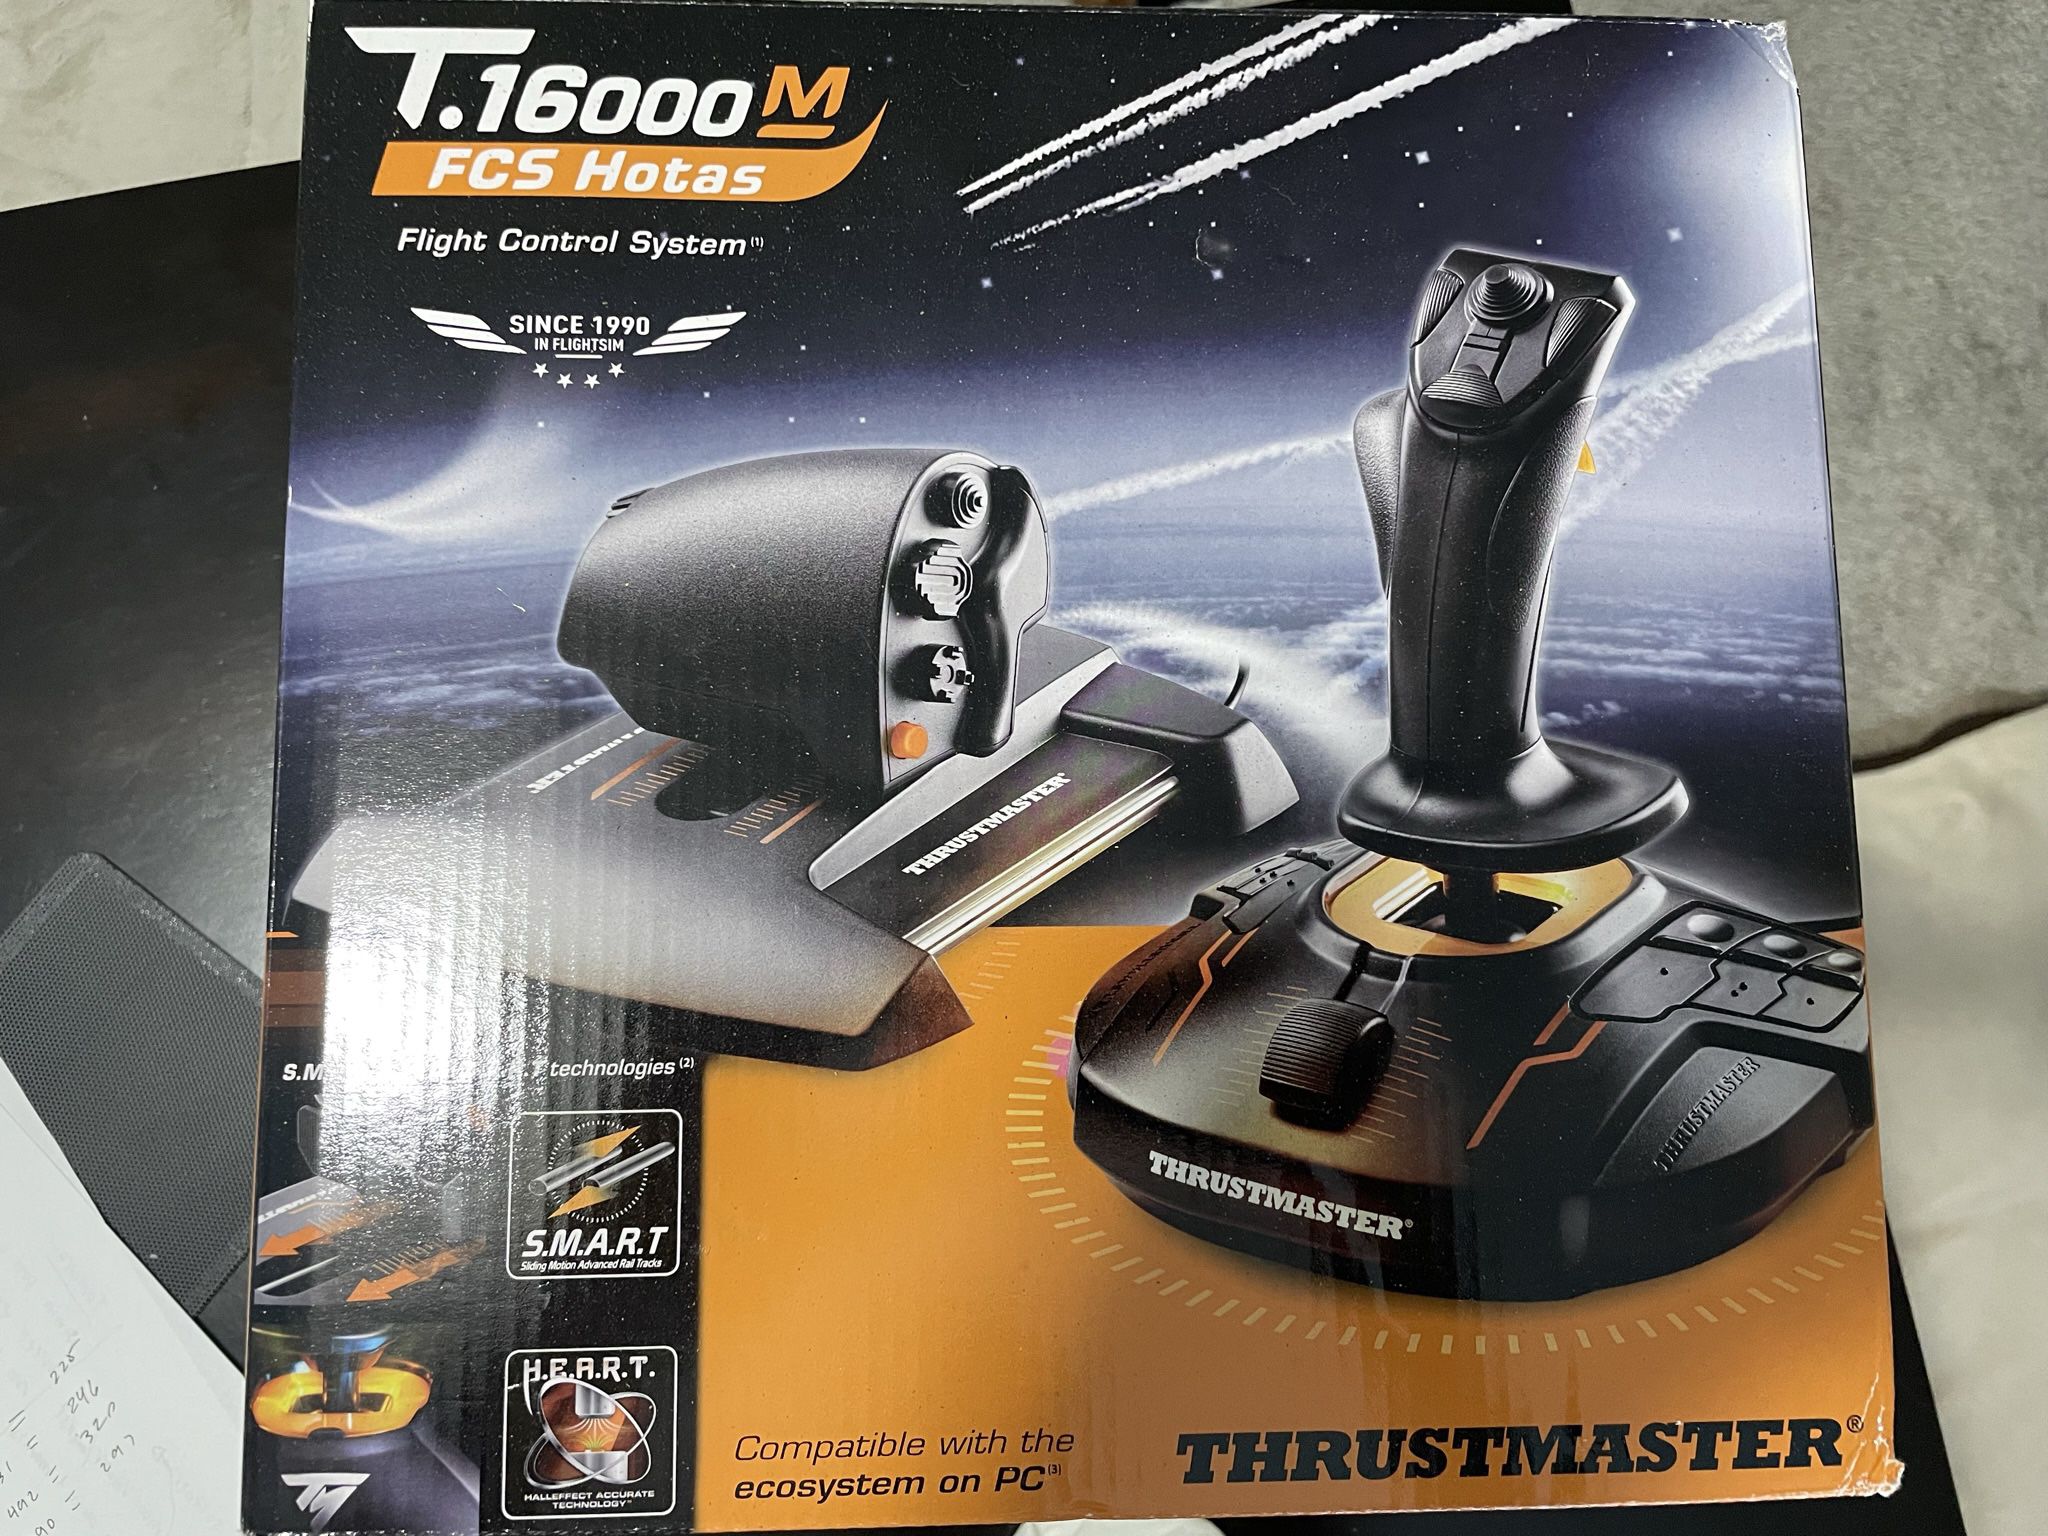 T.16000m OfferUp Fcs Thrustmaster System Sale in Control Flight - TX for Kyle,